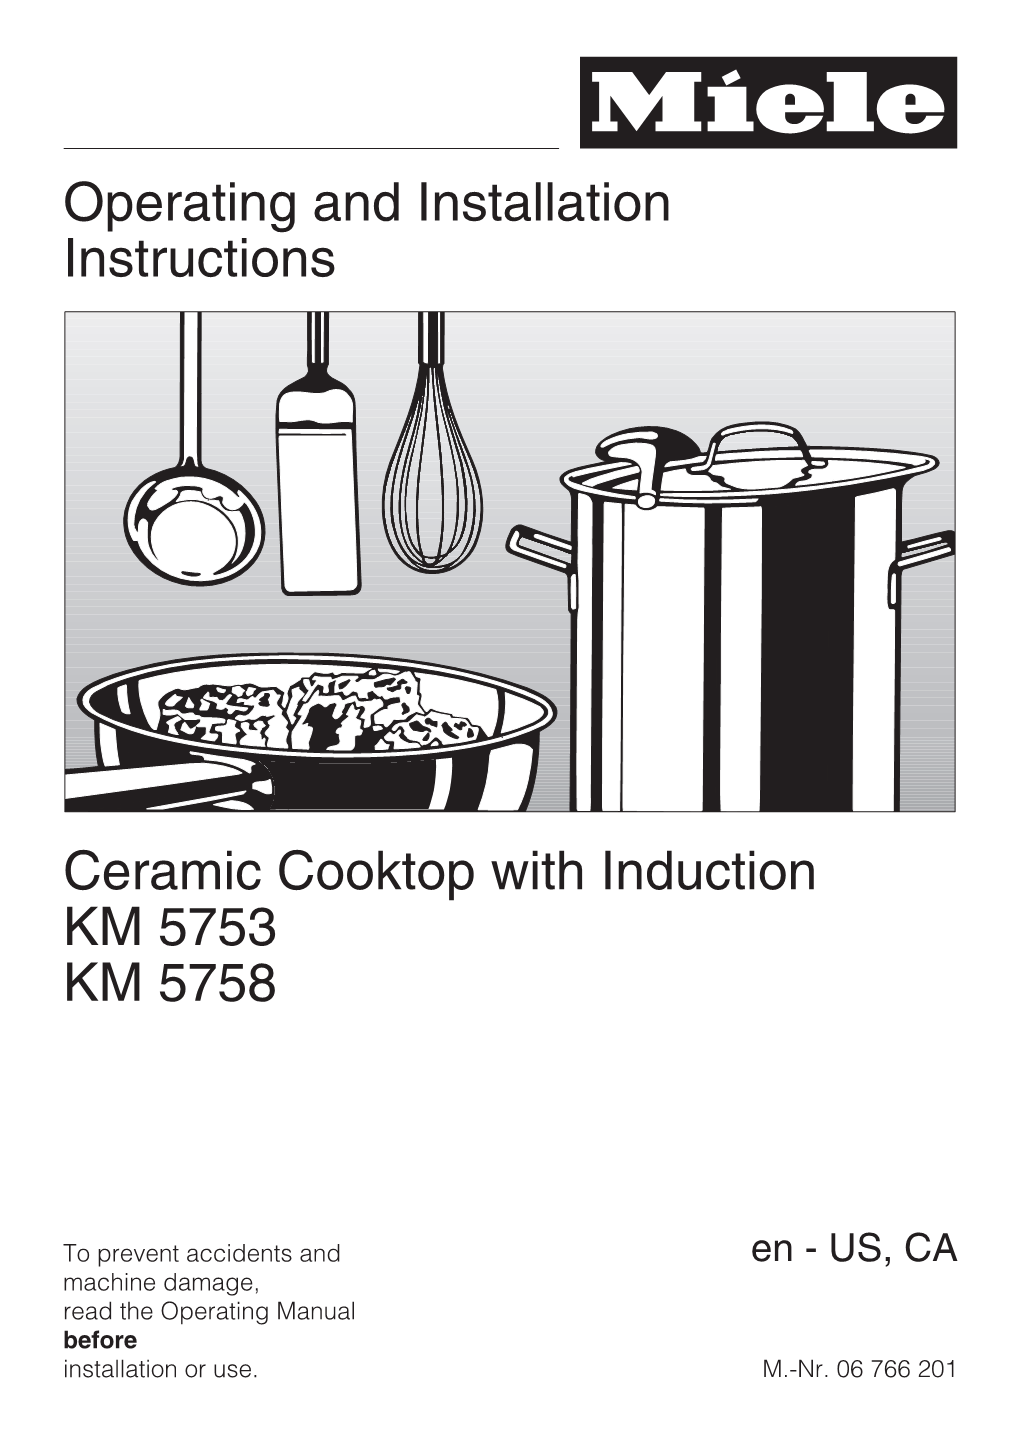 Operating and Installation Instructions Ceramic Cooktop with Induction KM